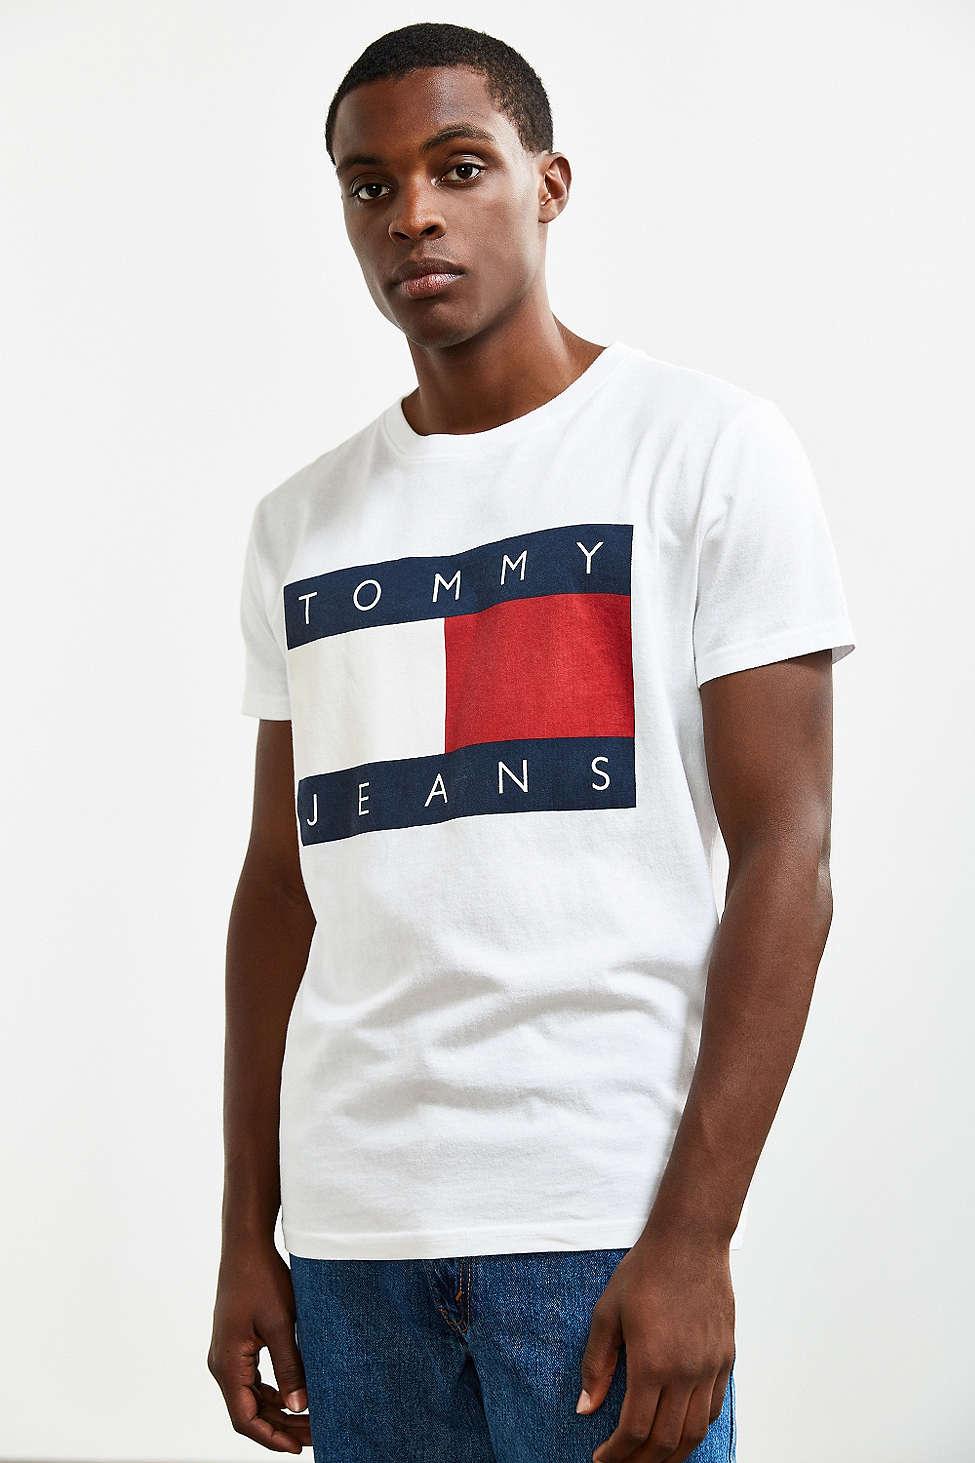 tommy jeans t shirt mens 90s